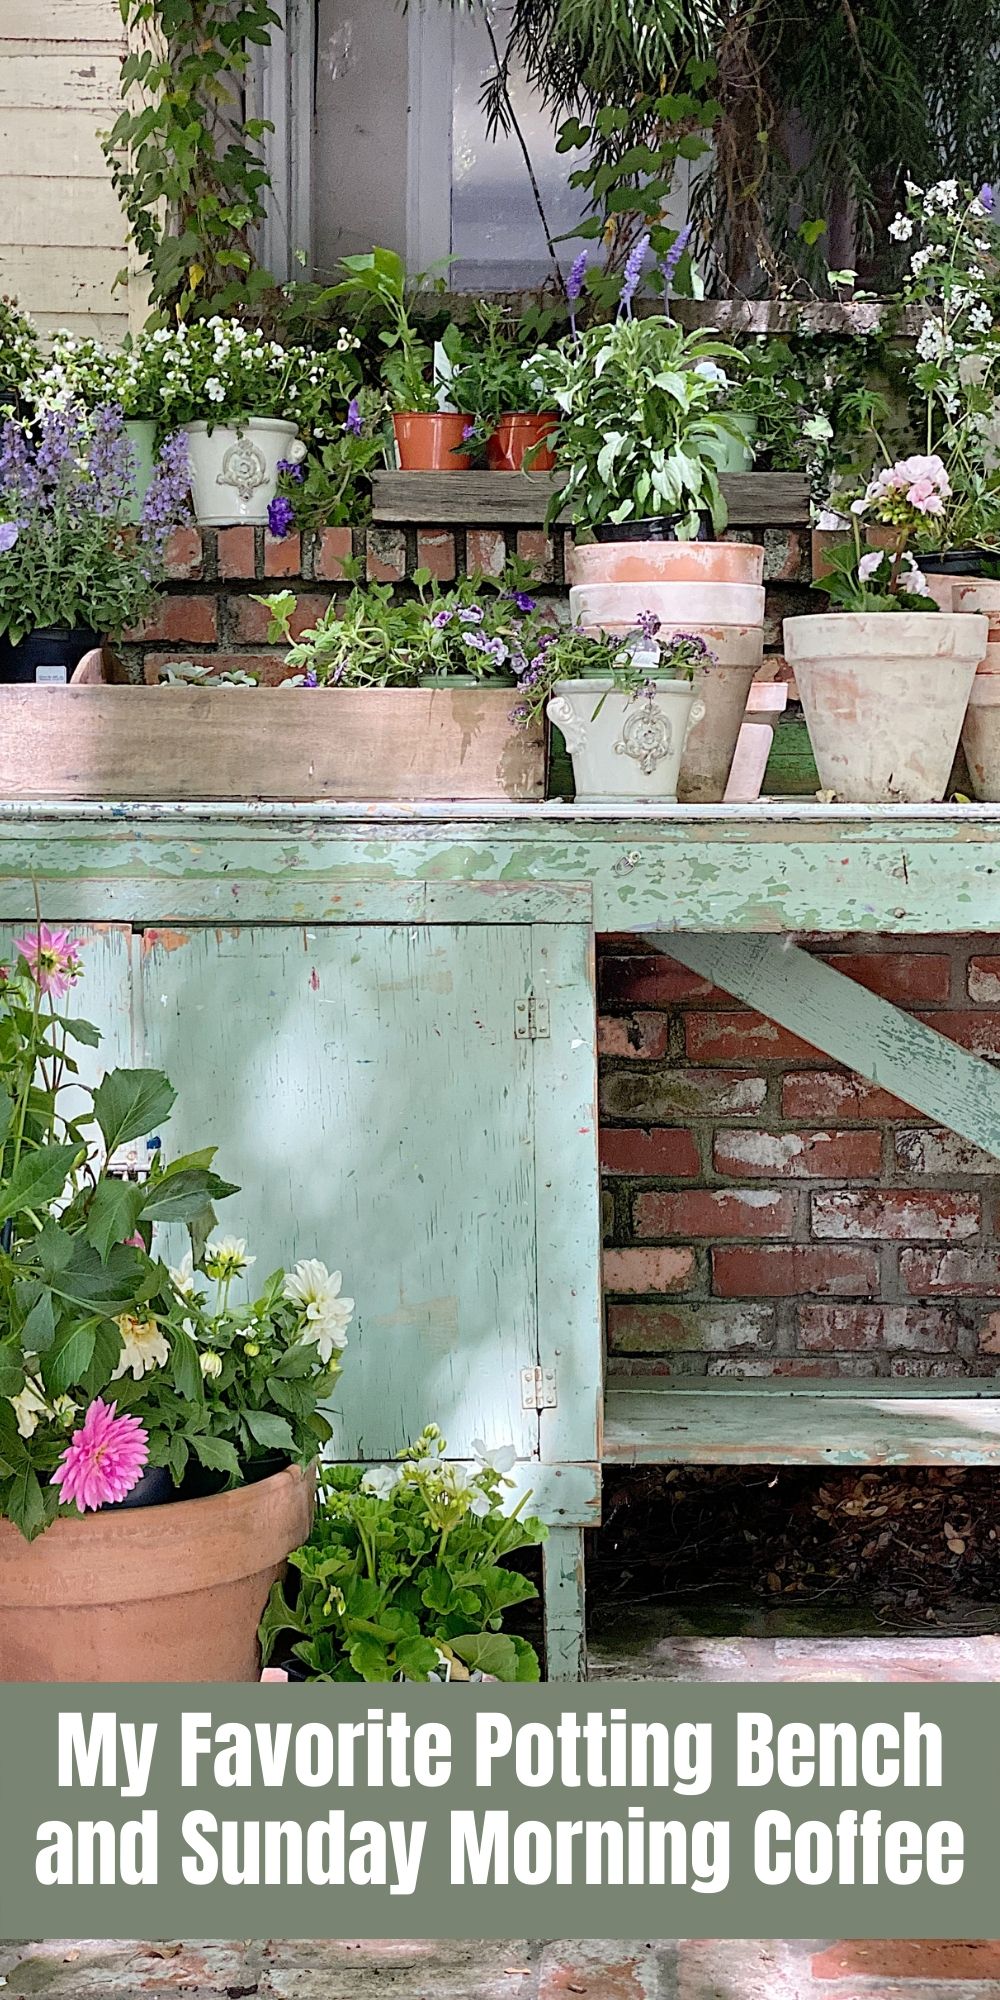 I spent a lot of time gardening this week. This potting bench has been my favorite place for planting and I had so much fun using it this week.